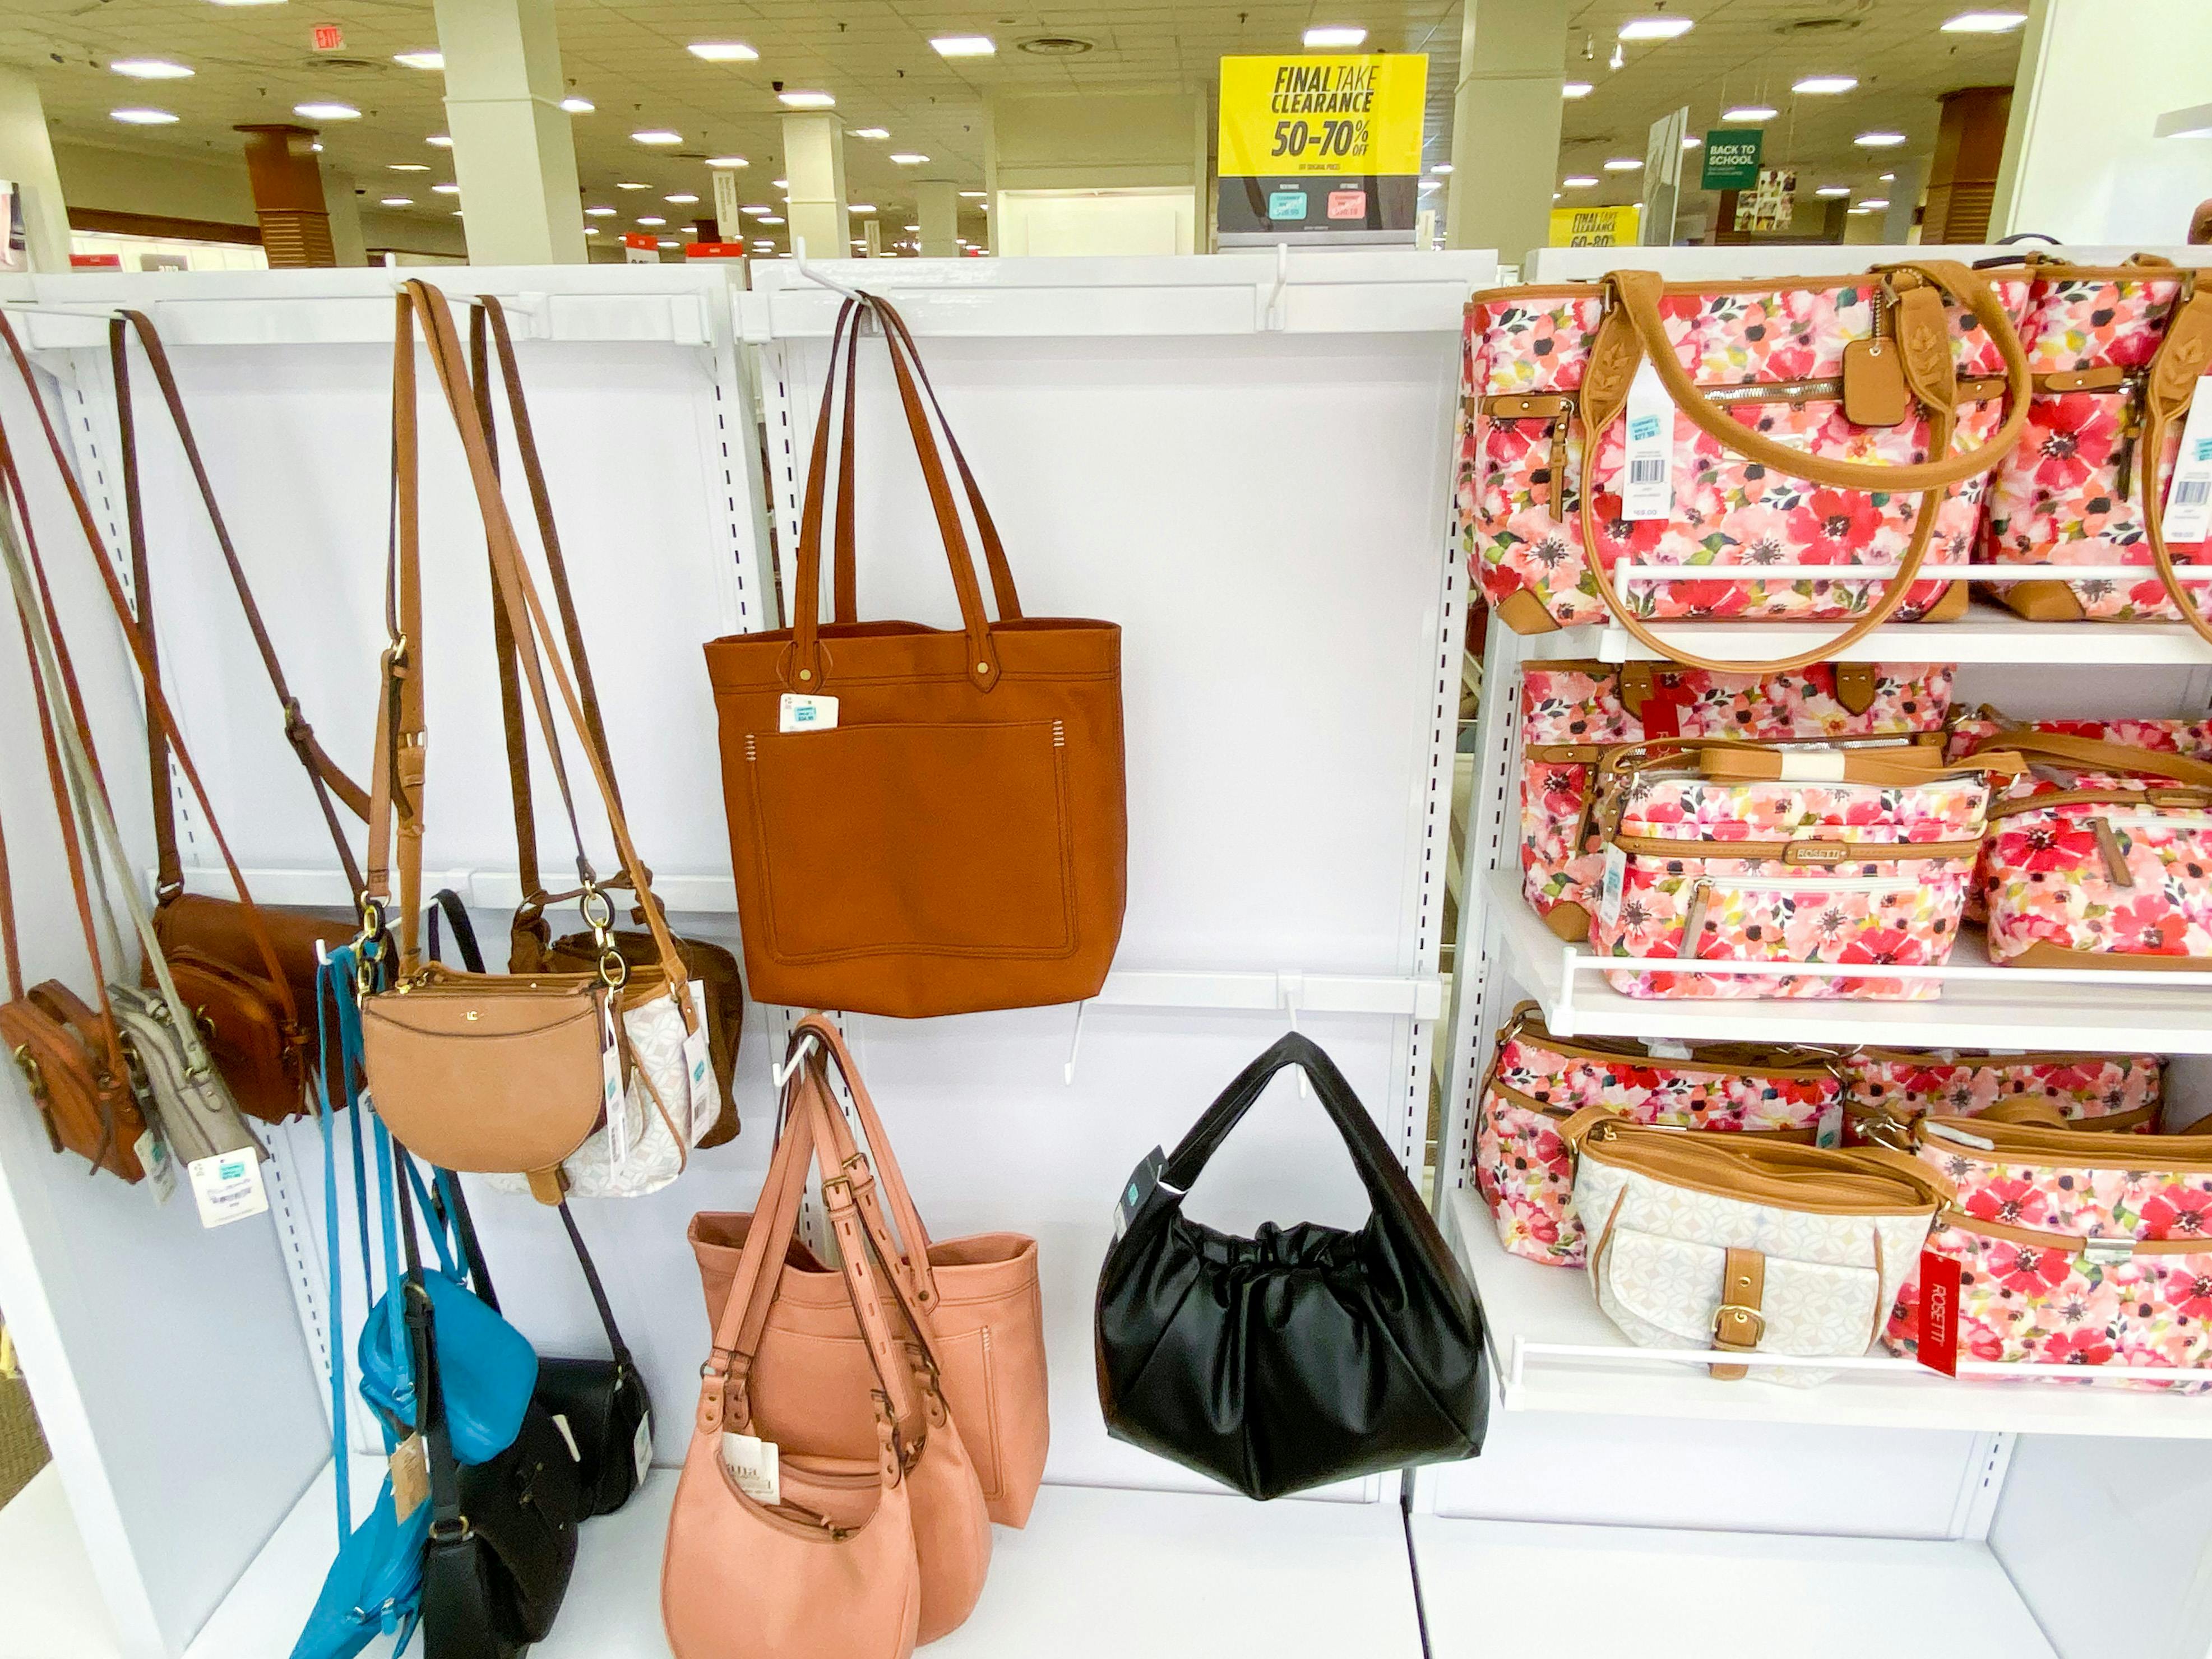 Accessory Clearance at JCPenney: $5 Wallets, $7.49 Purses & More